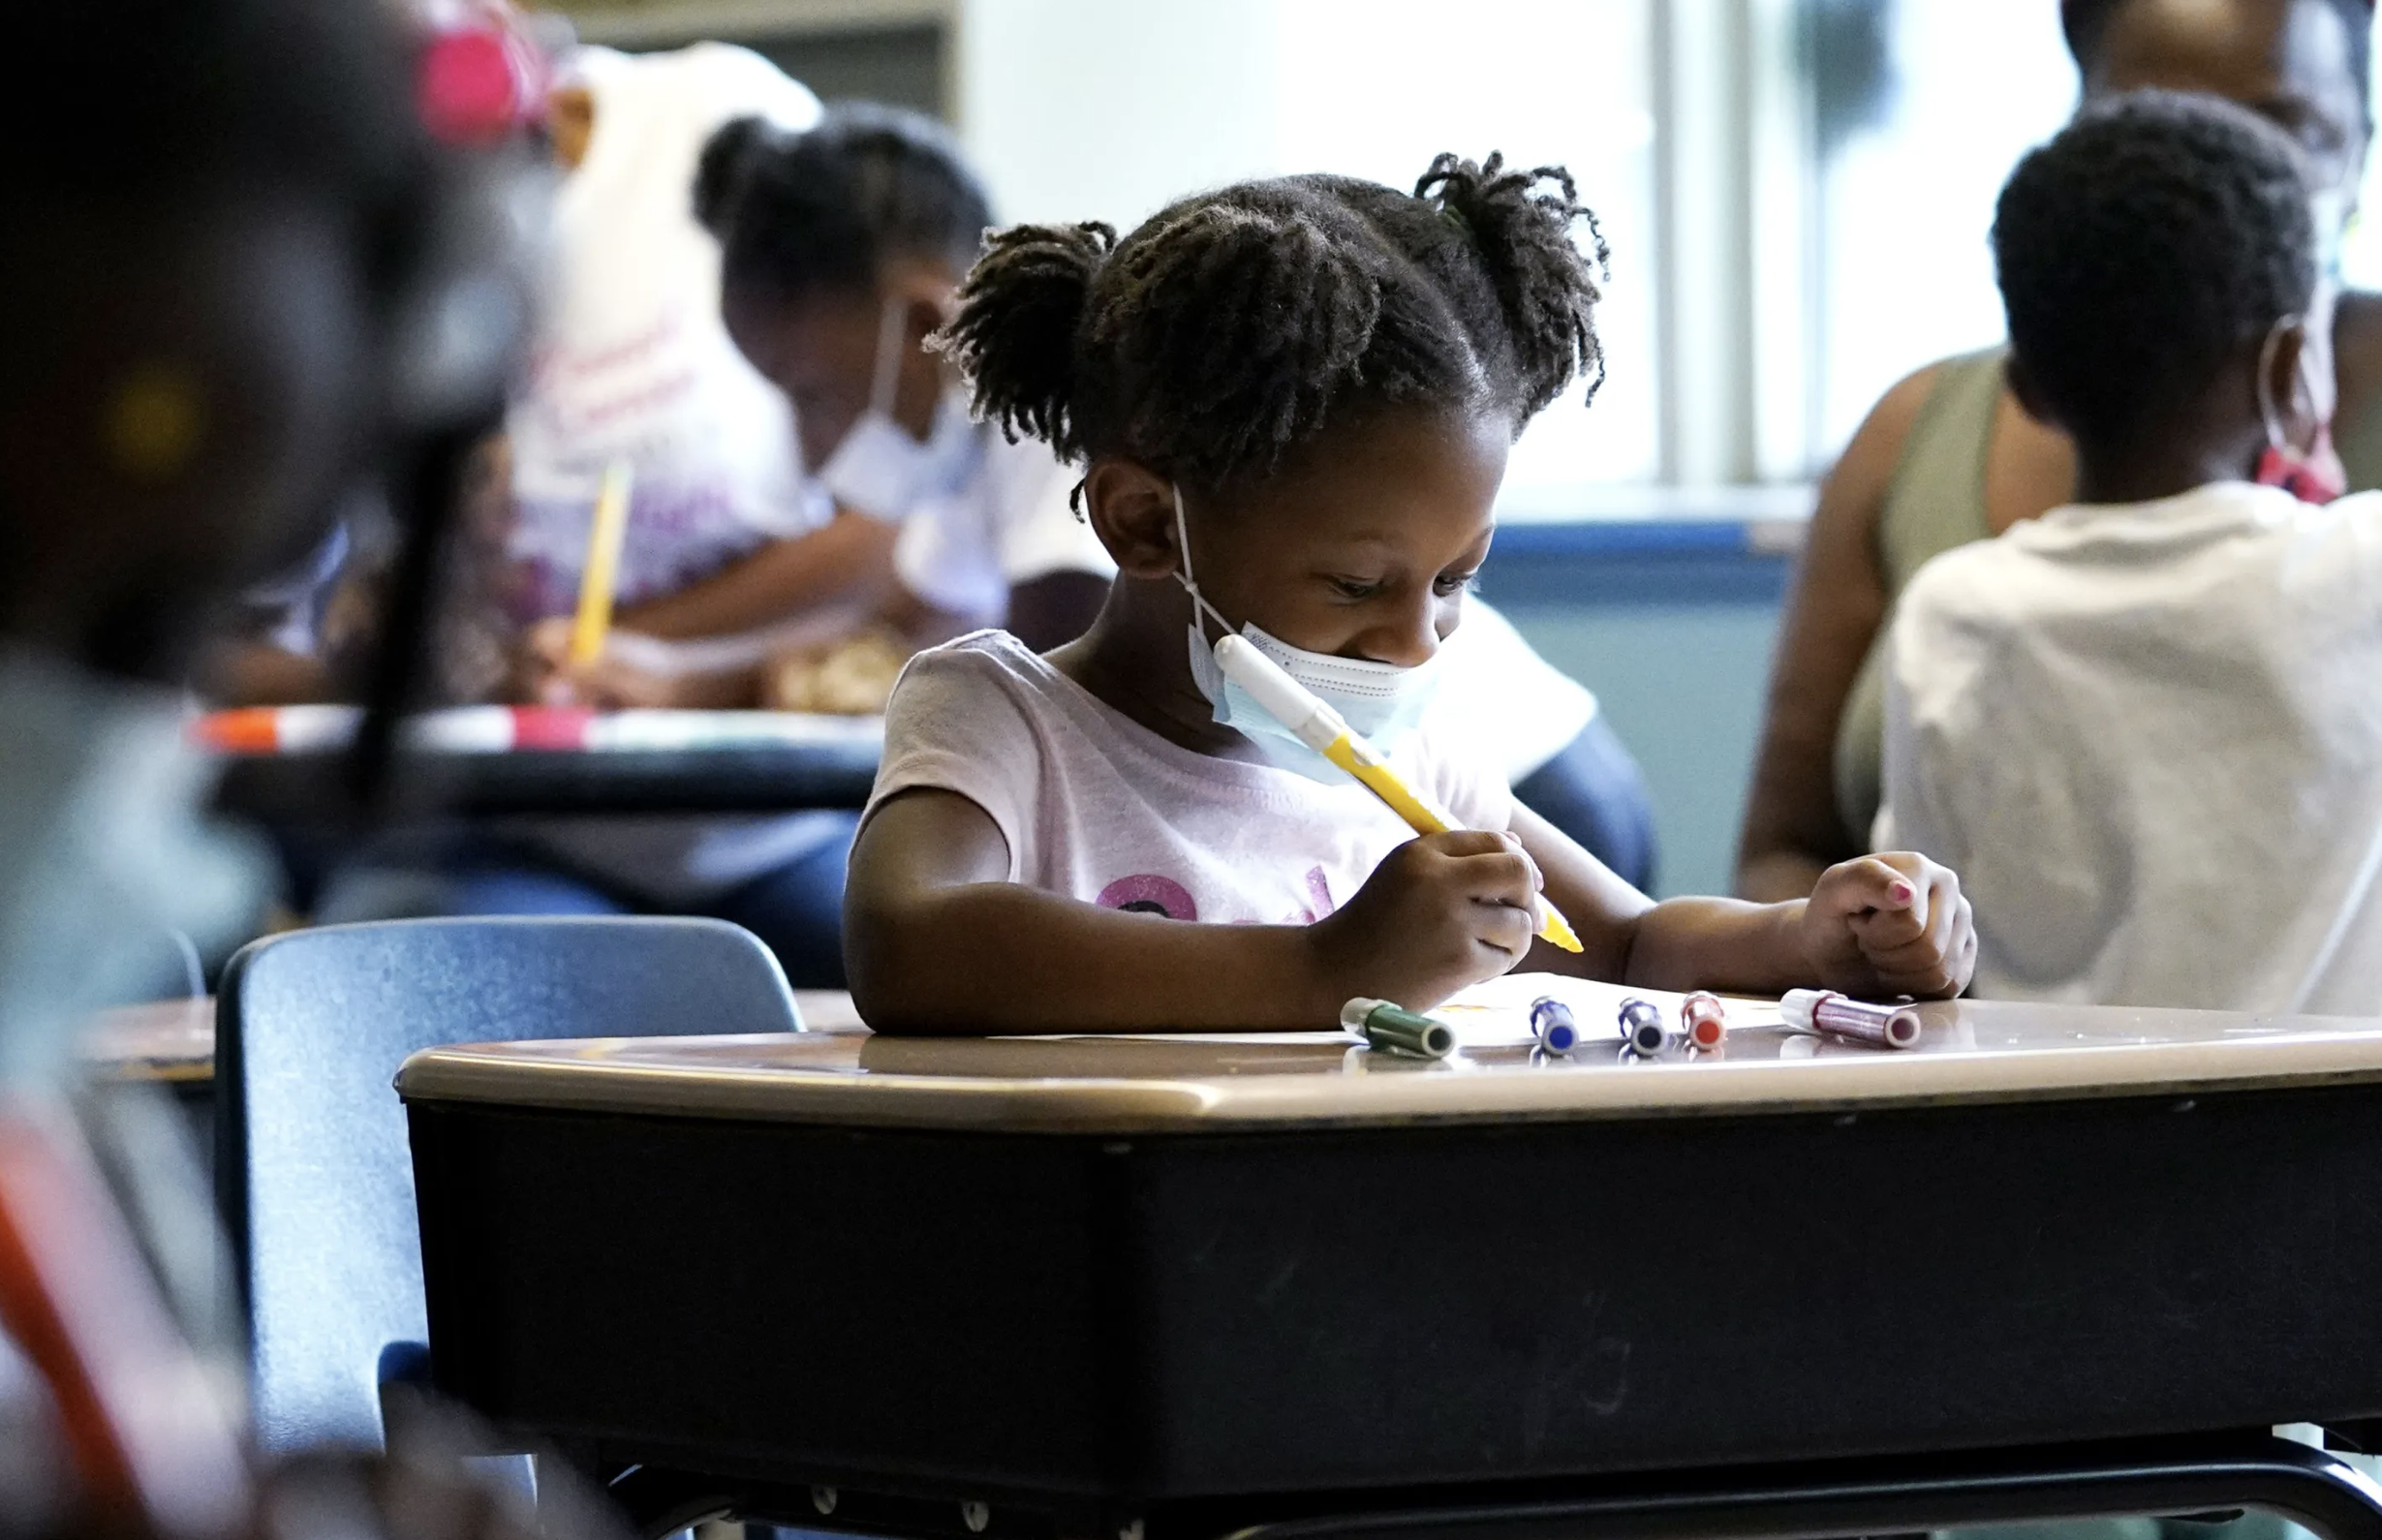 As fewer kids enroll, big cities face a small schools crisis